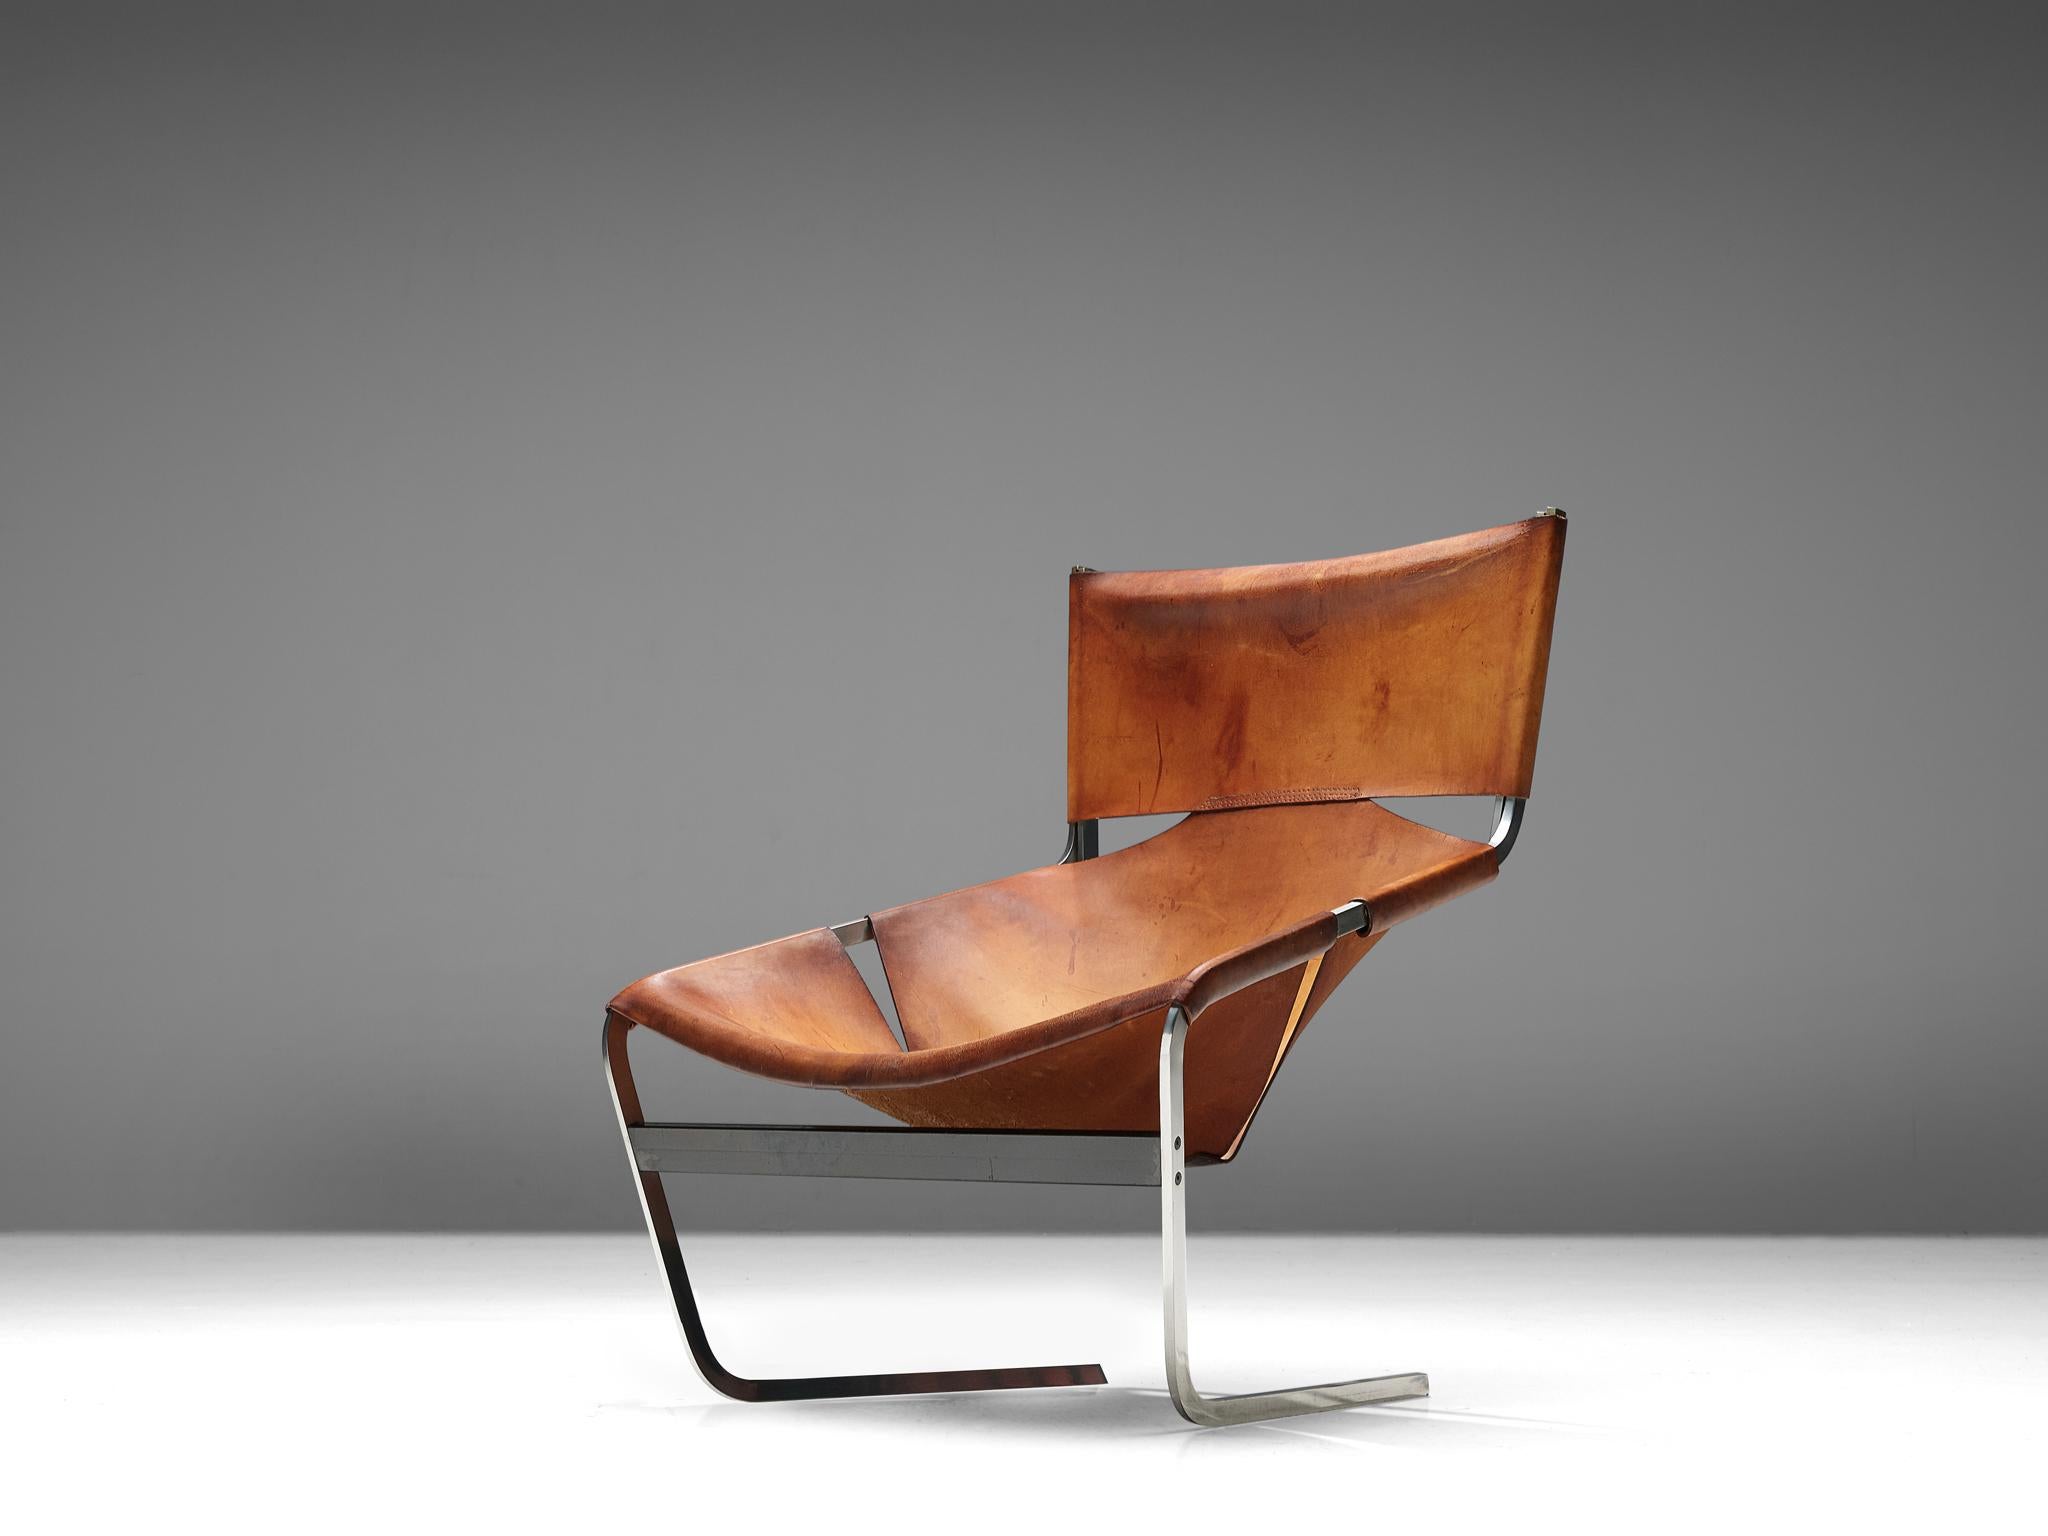 Pierre Paulin for Artifort, F-444 easy chair, metal and cognac leather, the Netherlands, circa 1962.

A cognac leather F-444 lounge chair, designed by Pierre Paulin for Artifort in 1962. The chair shows sharp lines and an angled open seat that